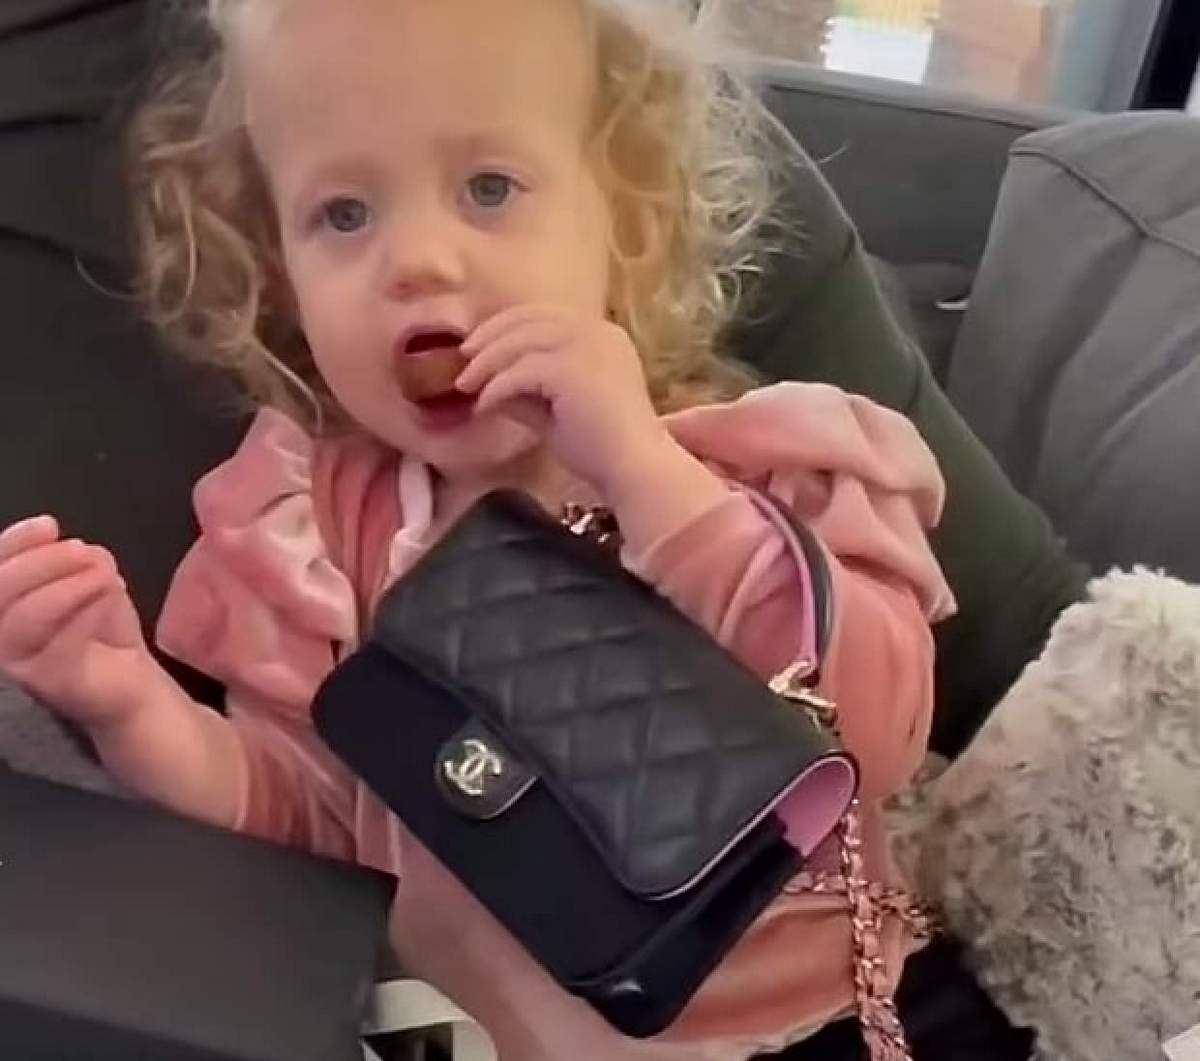 I gave my 3-year-old Louis Vuitton bags -- haters say she's a